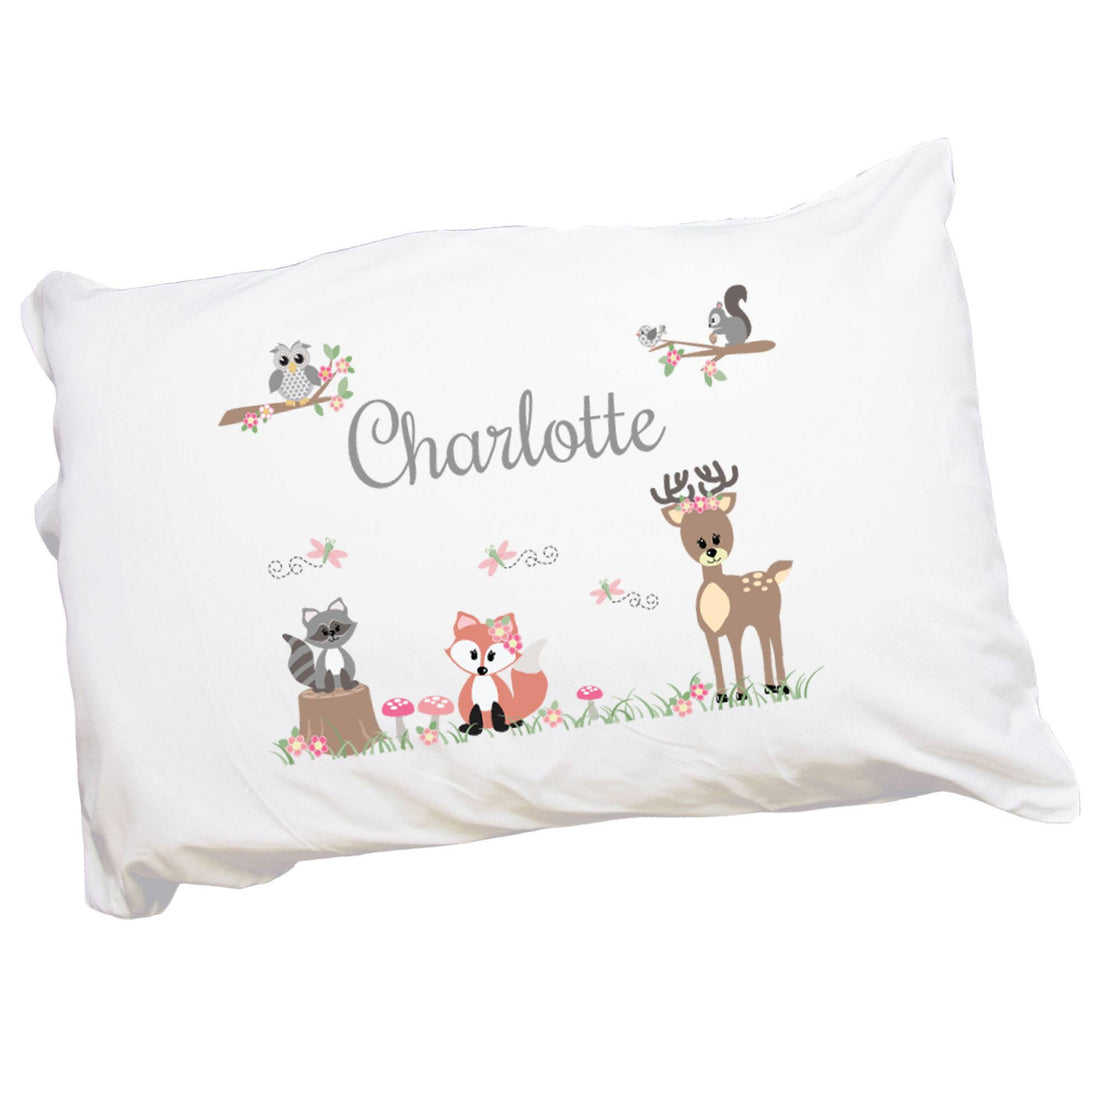 Personalized Childrens Pillowcase with Gray Woodland Critters design